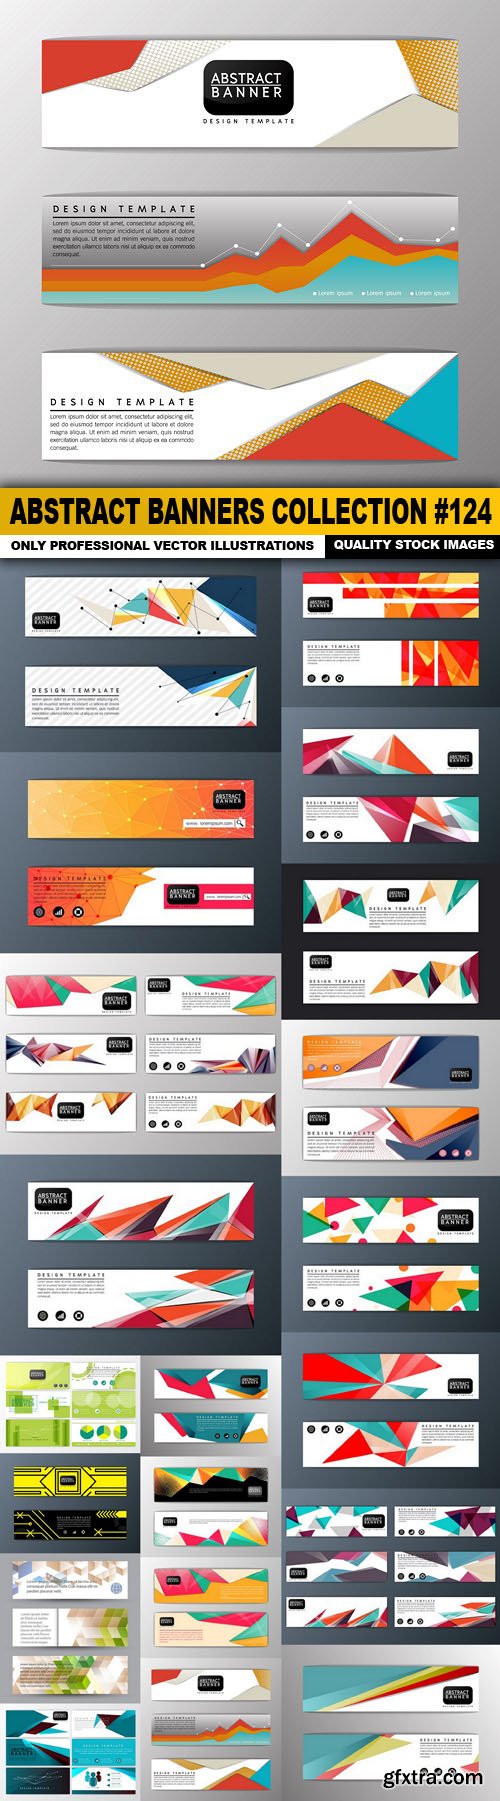 Abstract Banners Collection #124 - 20 Vectors